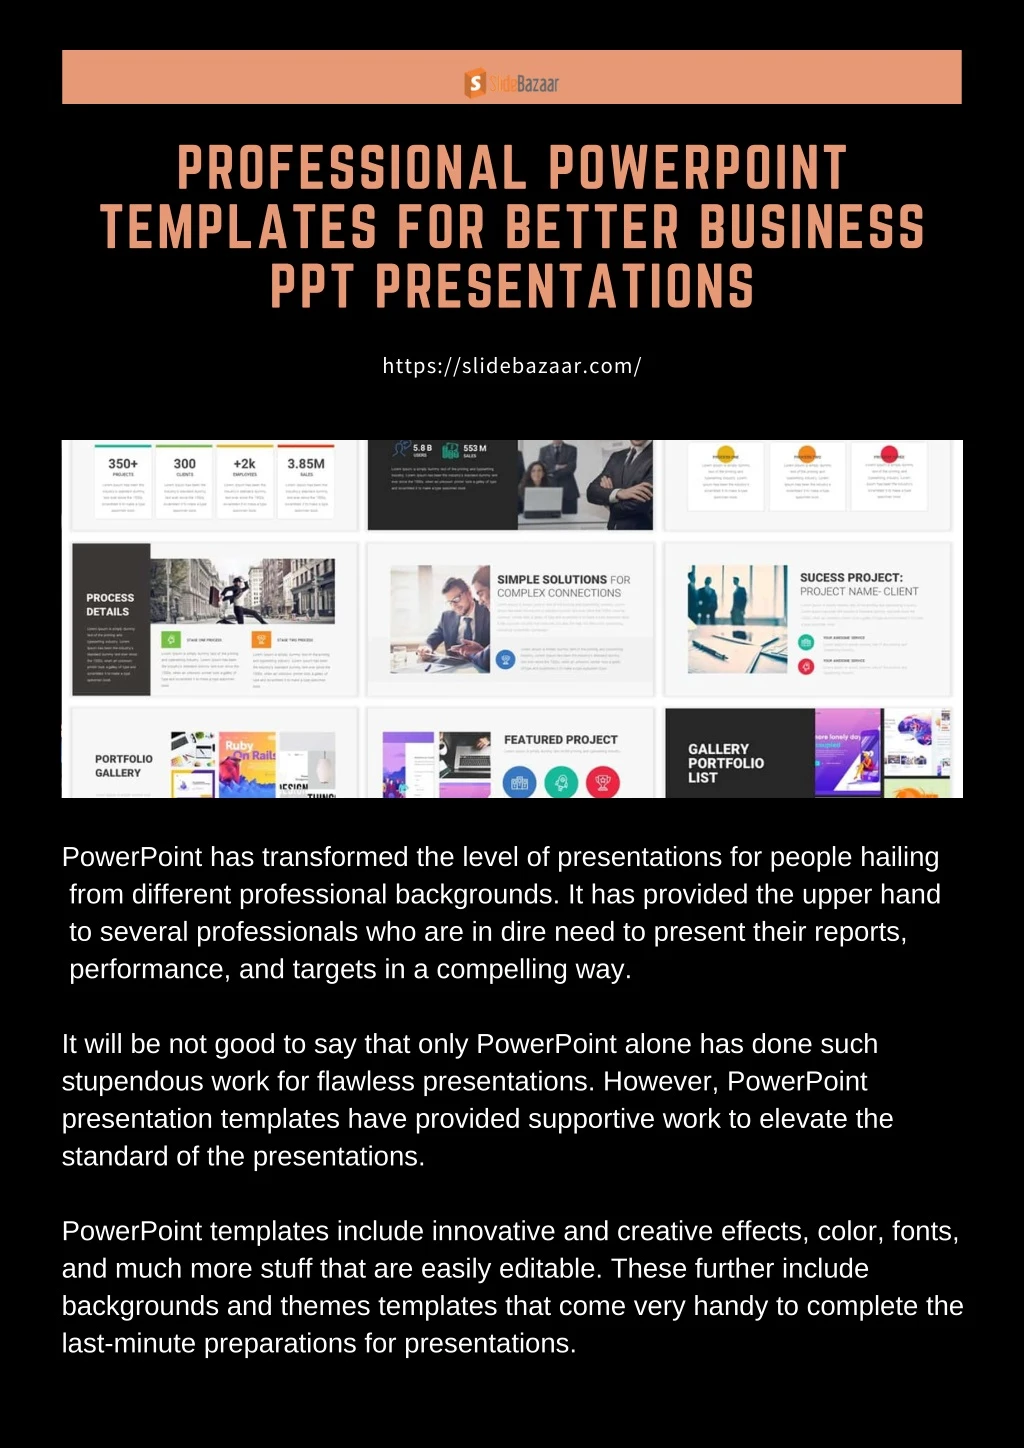 professional powerpoint templates for better